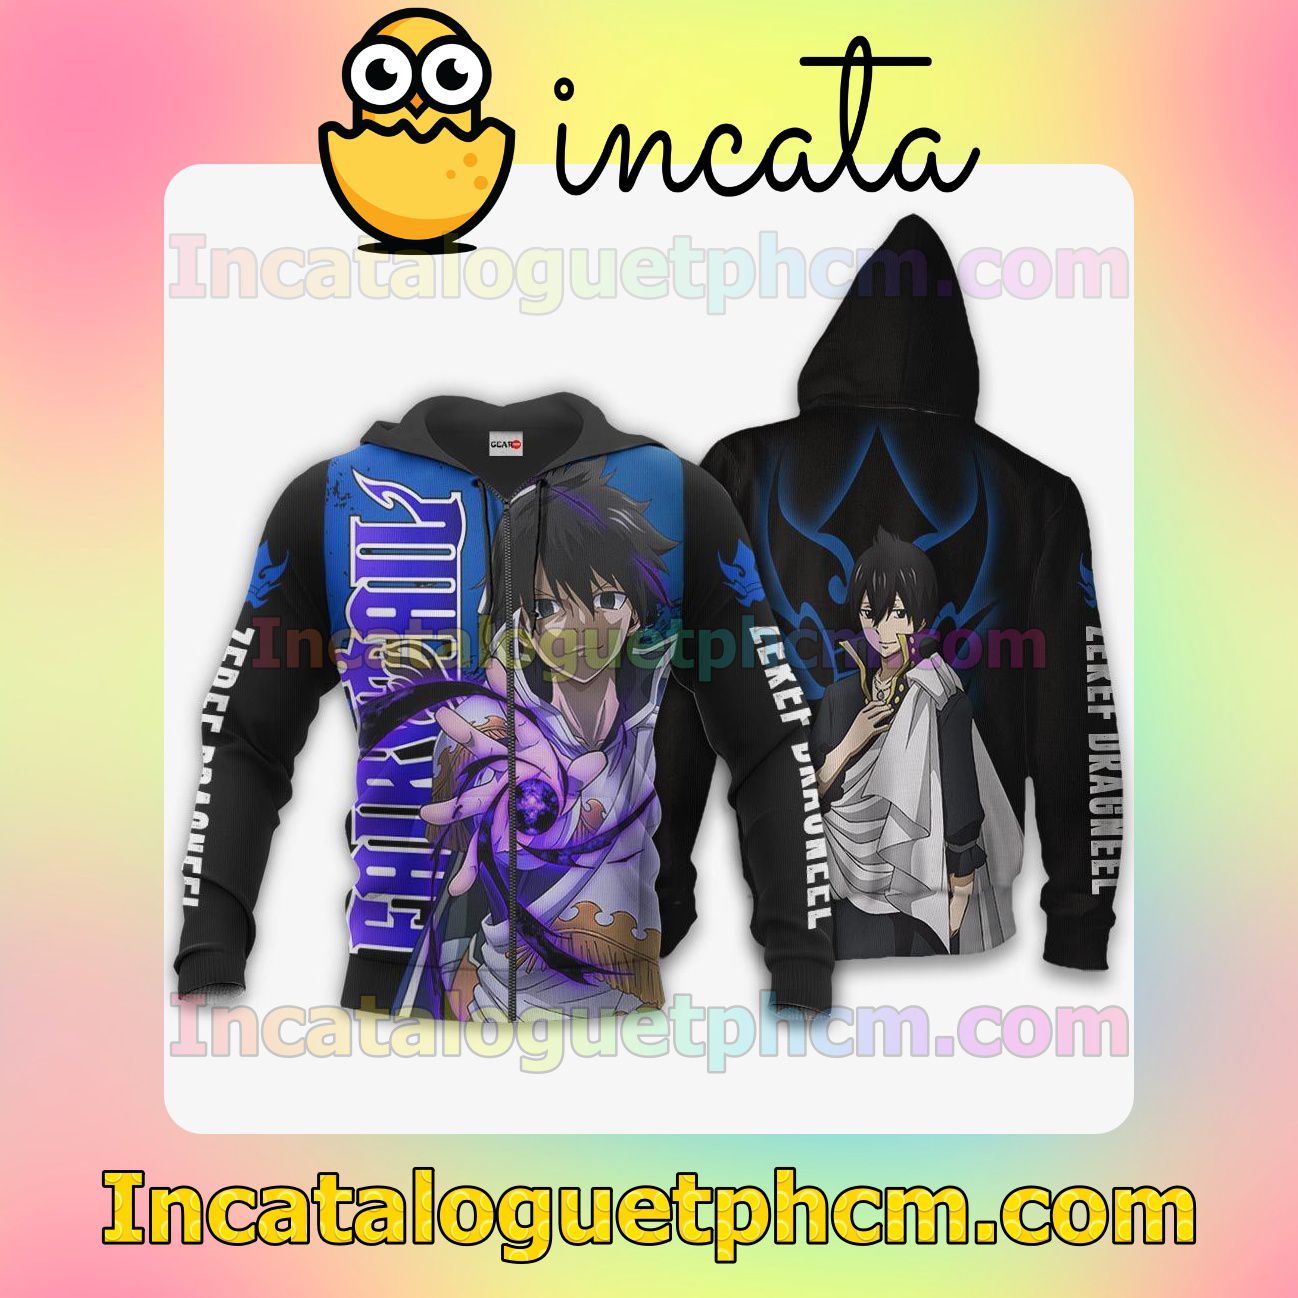 Zeref Dragneel Fairy Tail Anime Merch Stores Clothing Merch Zip Hoodie Jacket Shirts